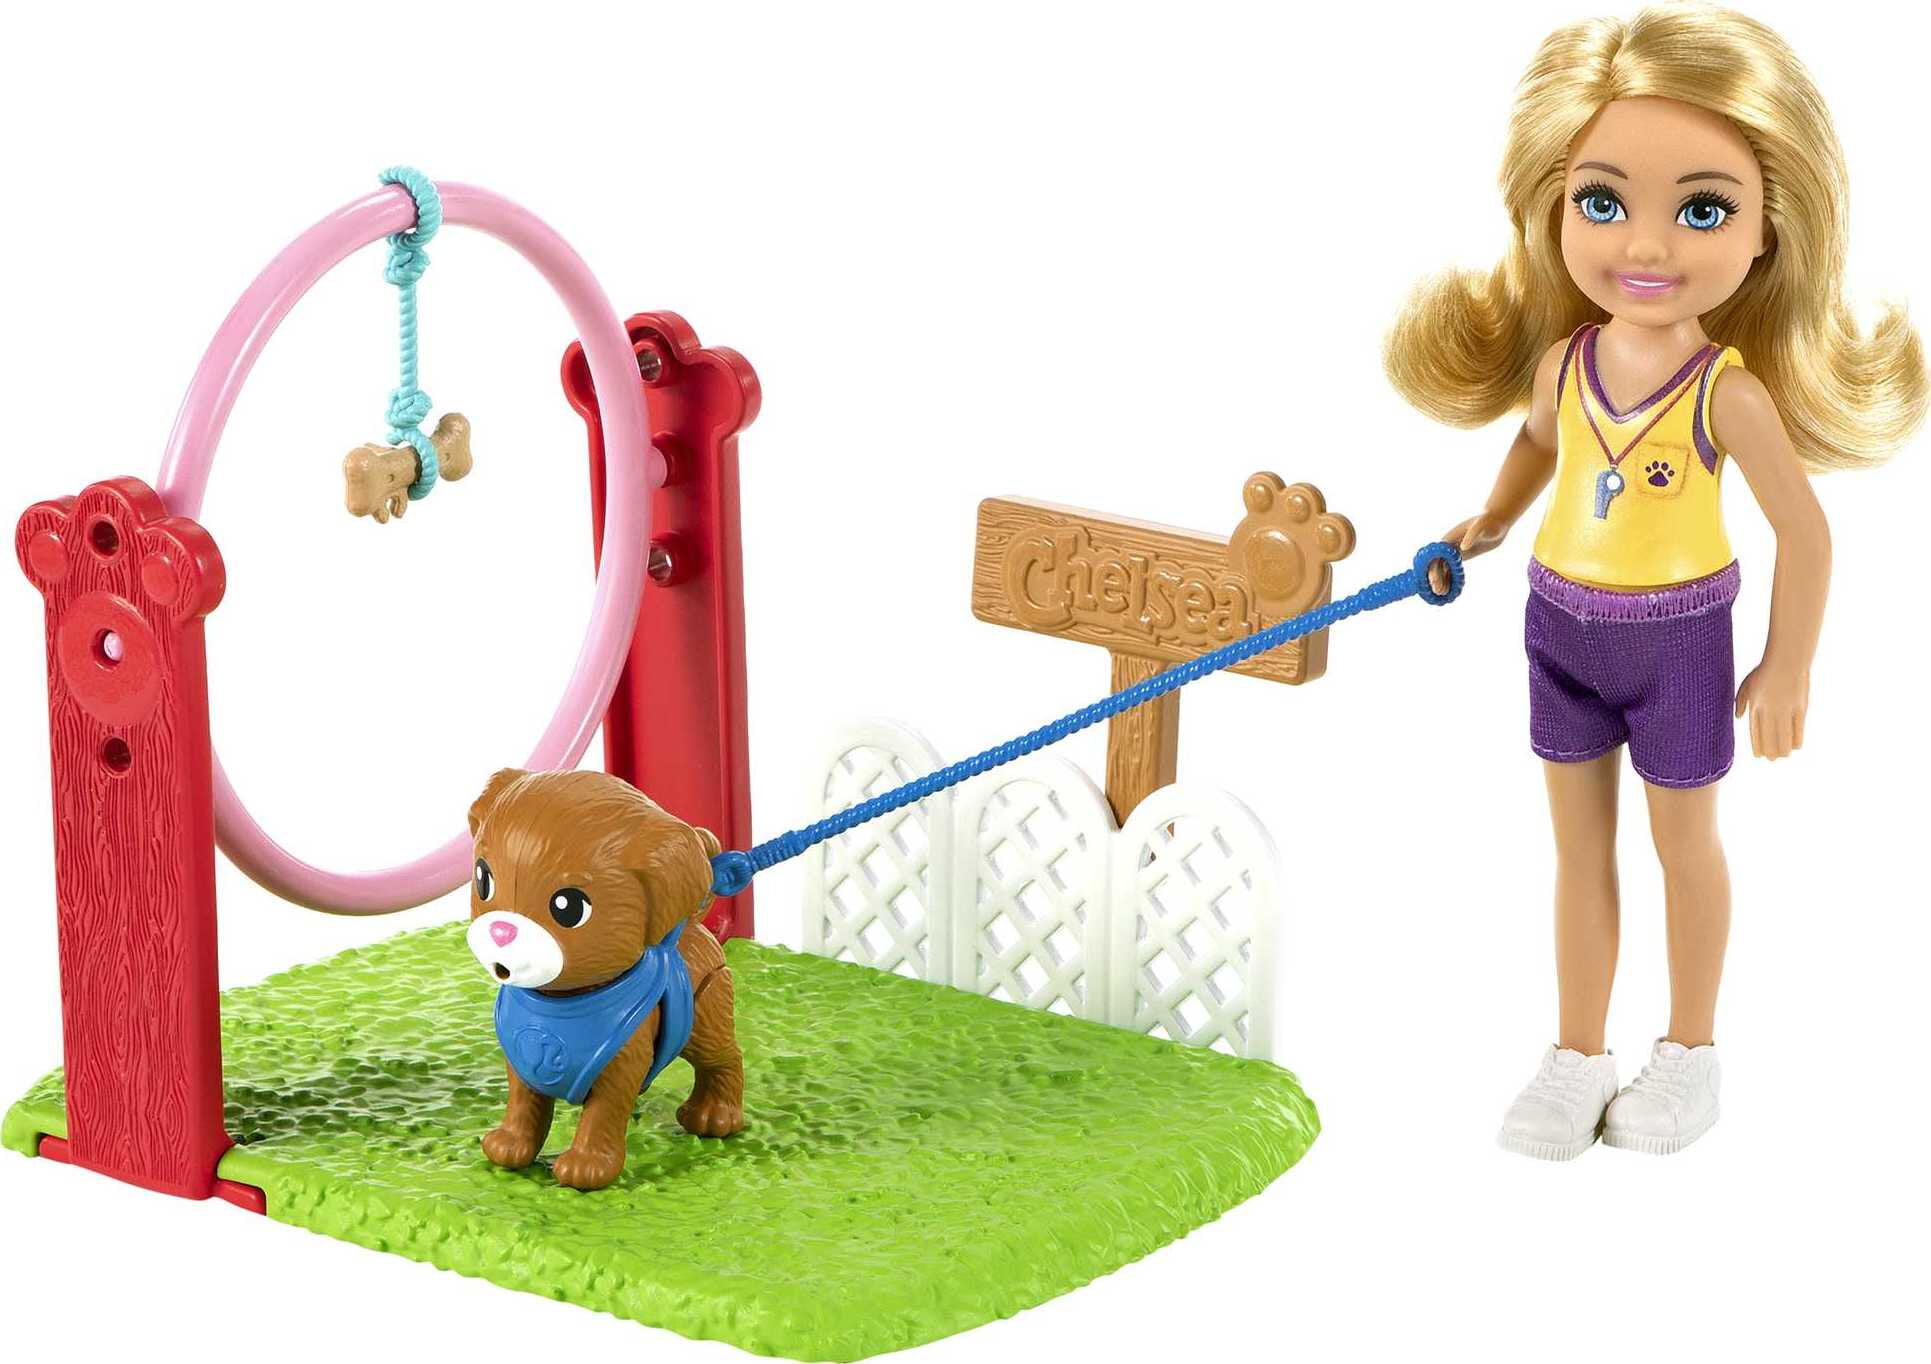 11.5-in Barbie and Chelsea The Lost Birthday Playset with Barbie Doll Gift for 3 to 7 Year Olds Pet Puppy and Travel Accessories